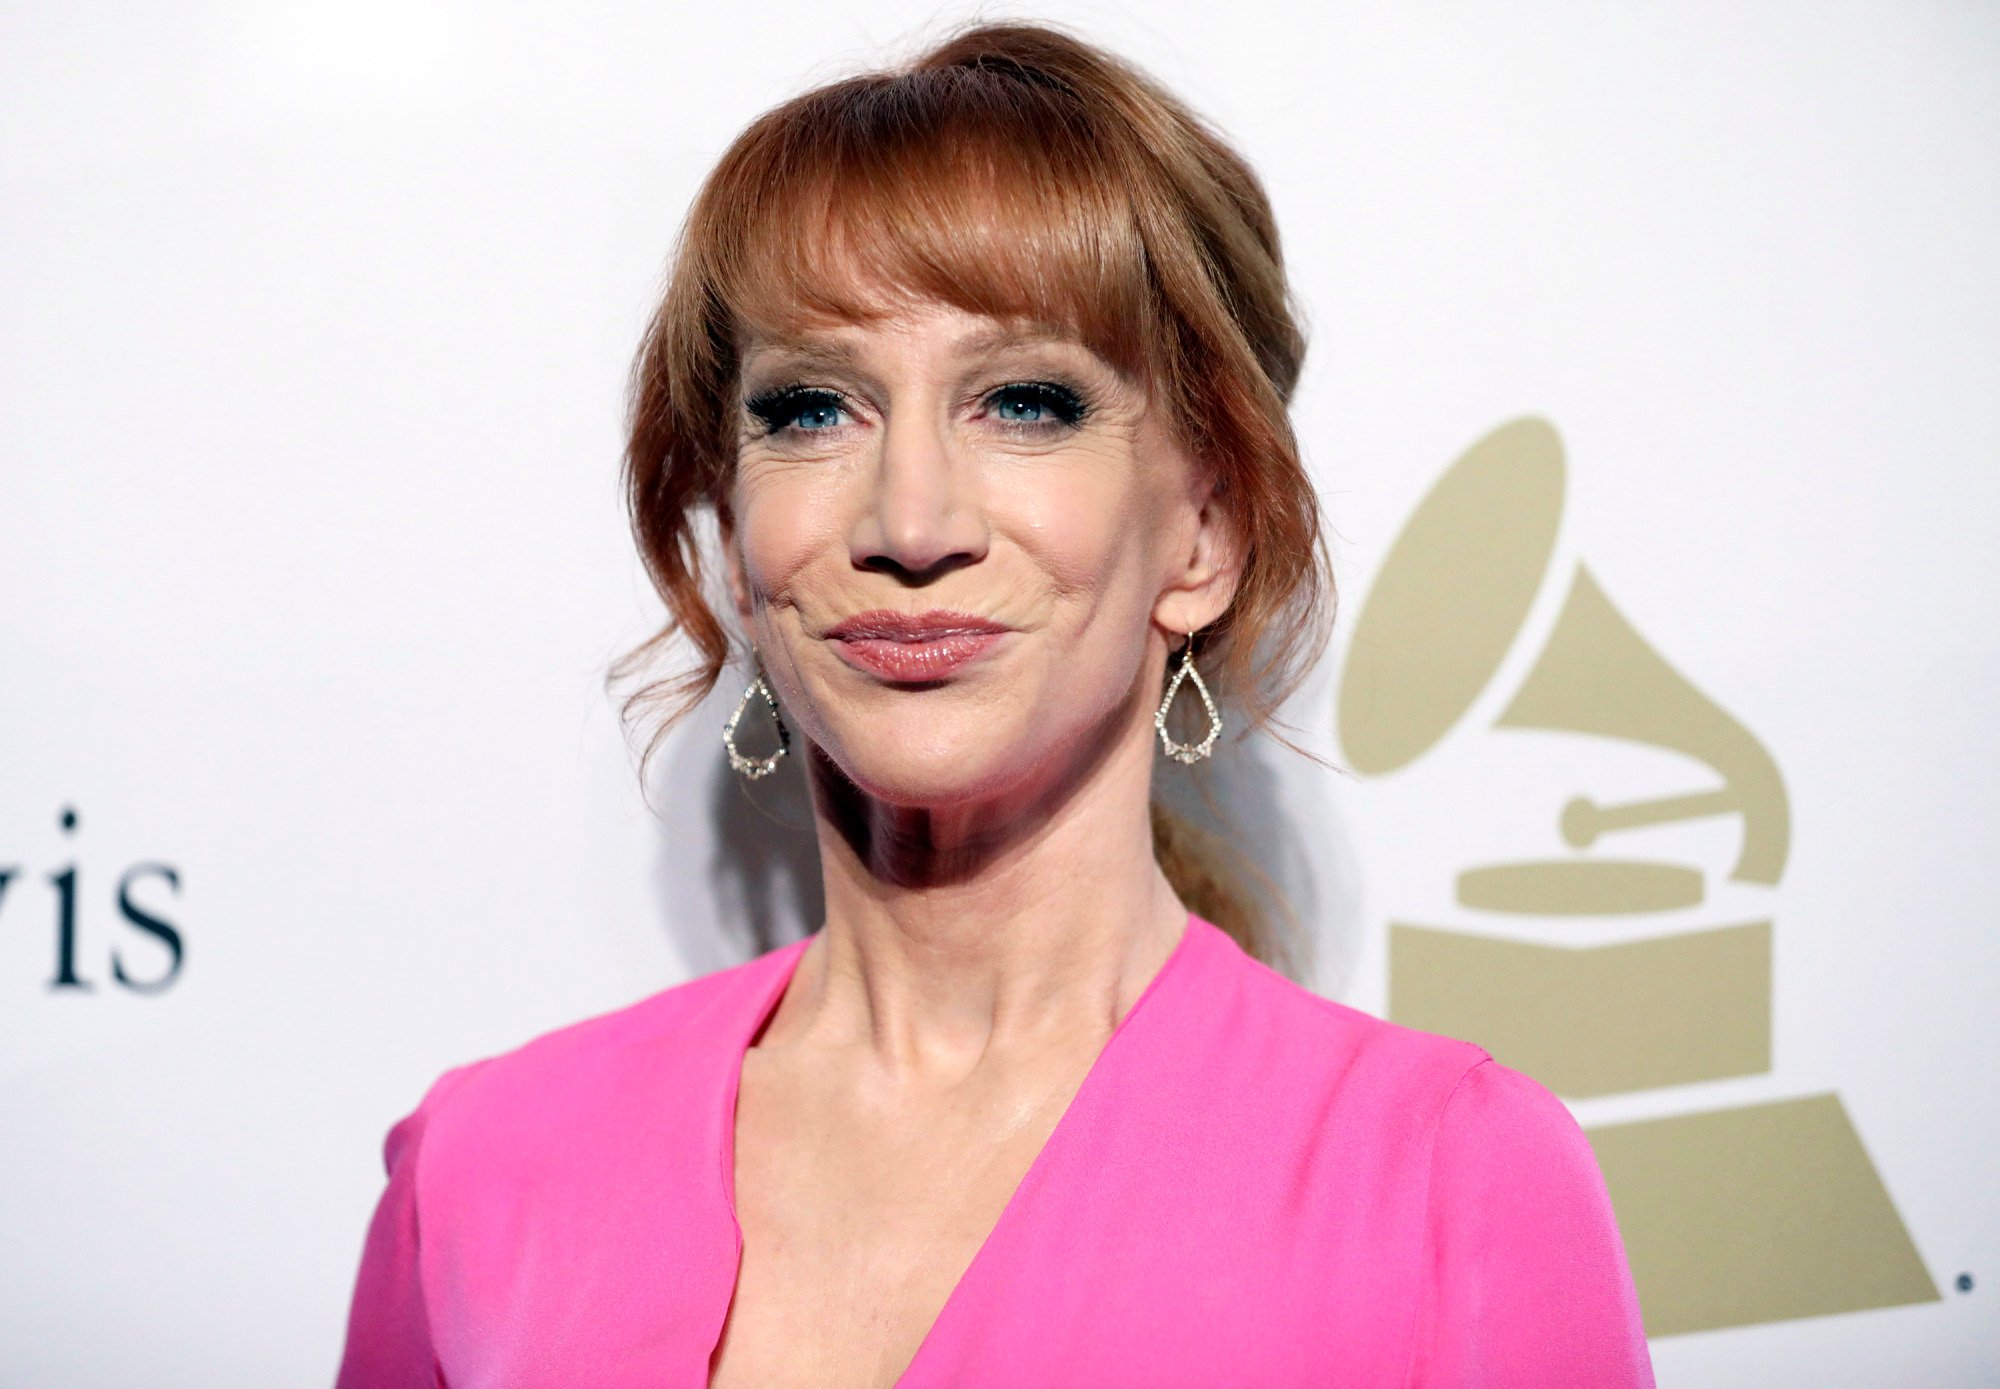 Comedian Kathy Griffin’s Donald Trump gag was apparently in such poor taste that Squatty Potty and others abandoned her. Photo: AP